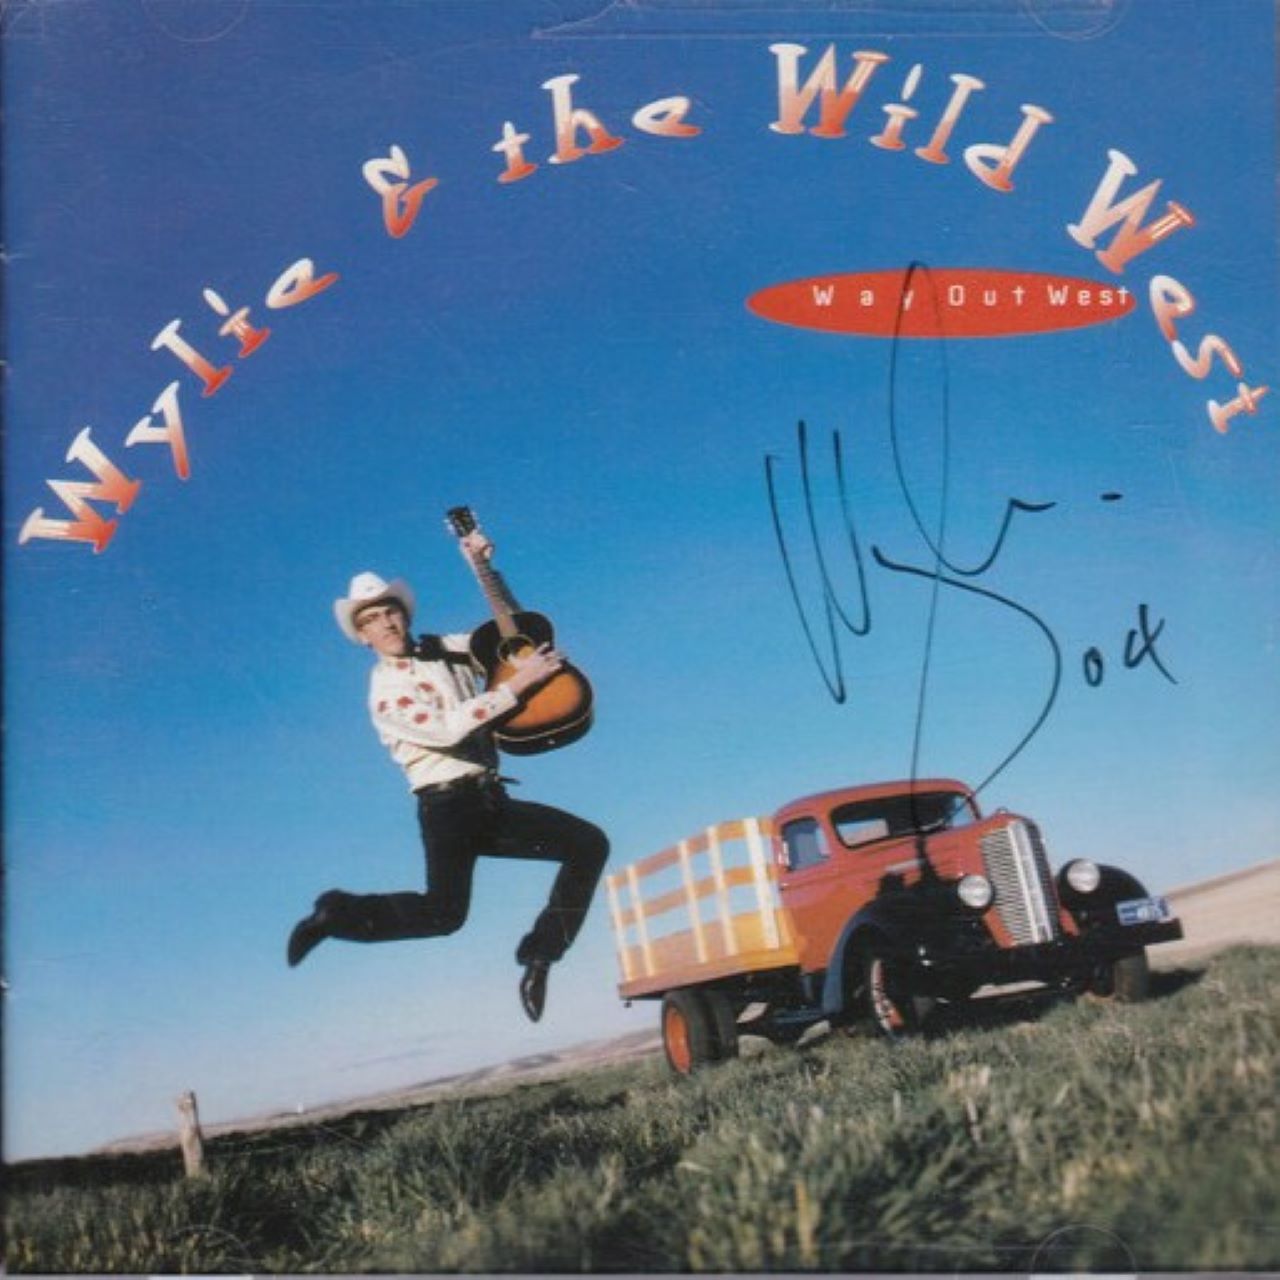 Wylie & The Wild West - Way Out West cover album